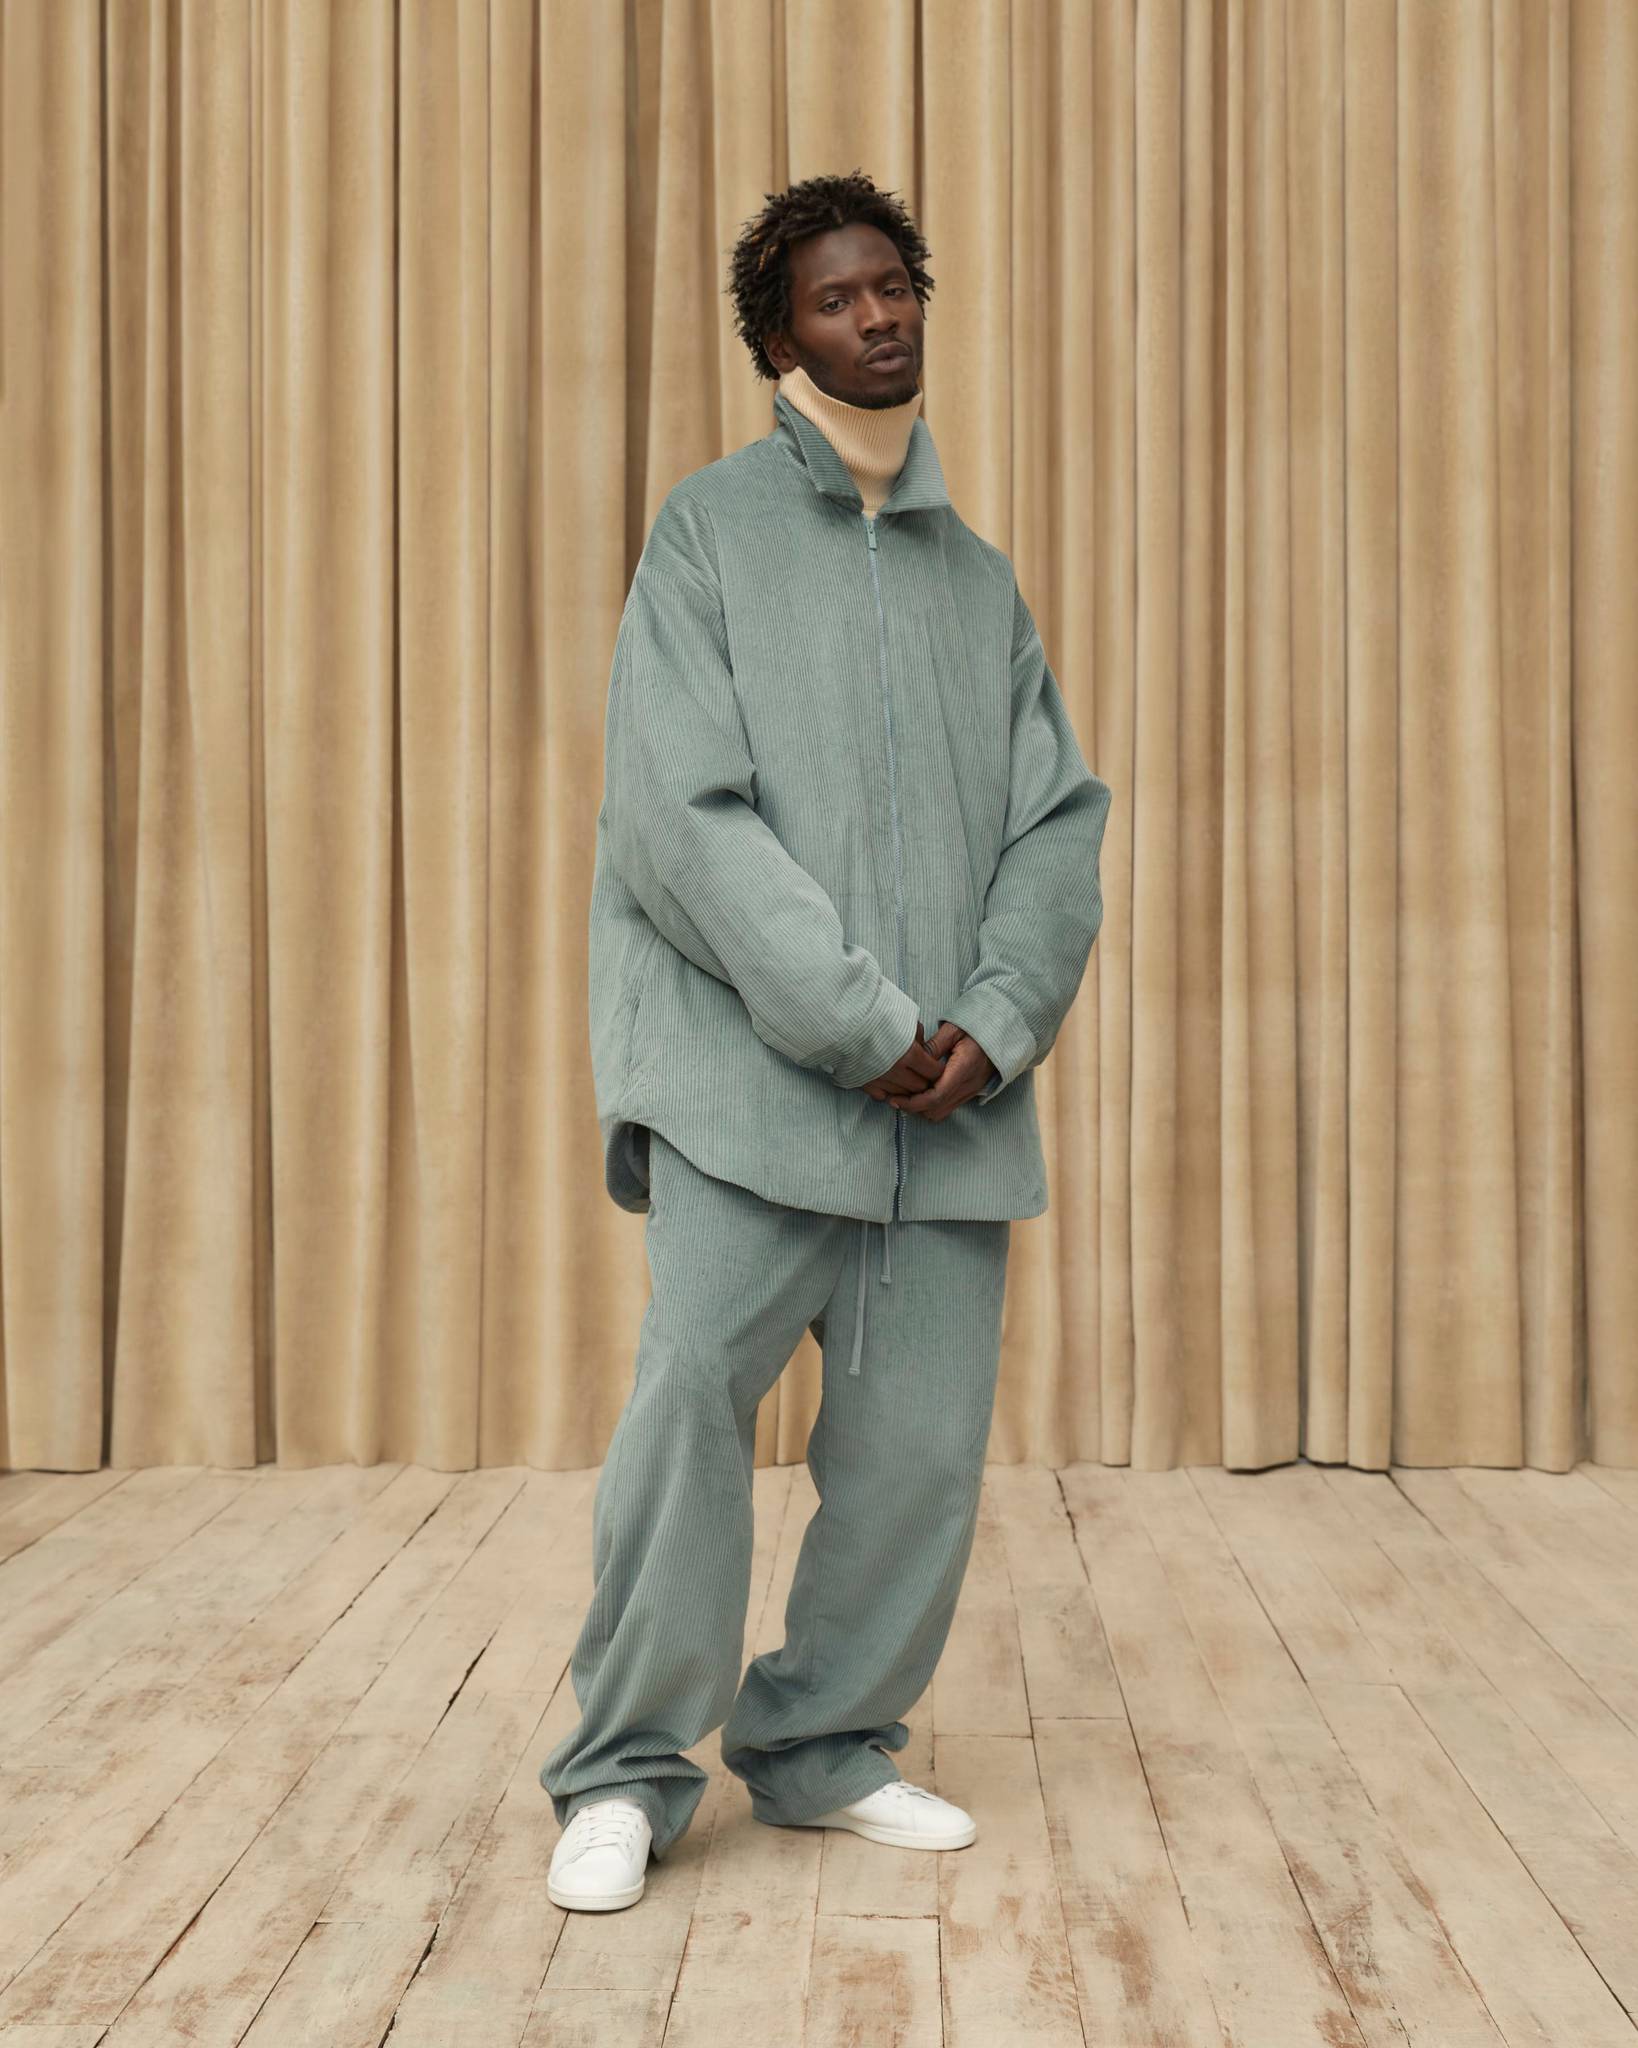 FOG Essentials Leans Into Ballet Core For Spring '23 Styling